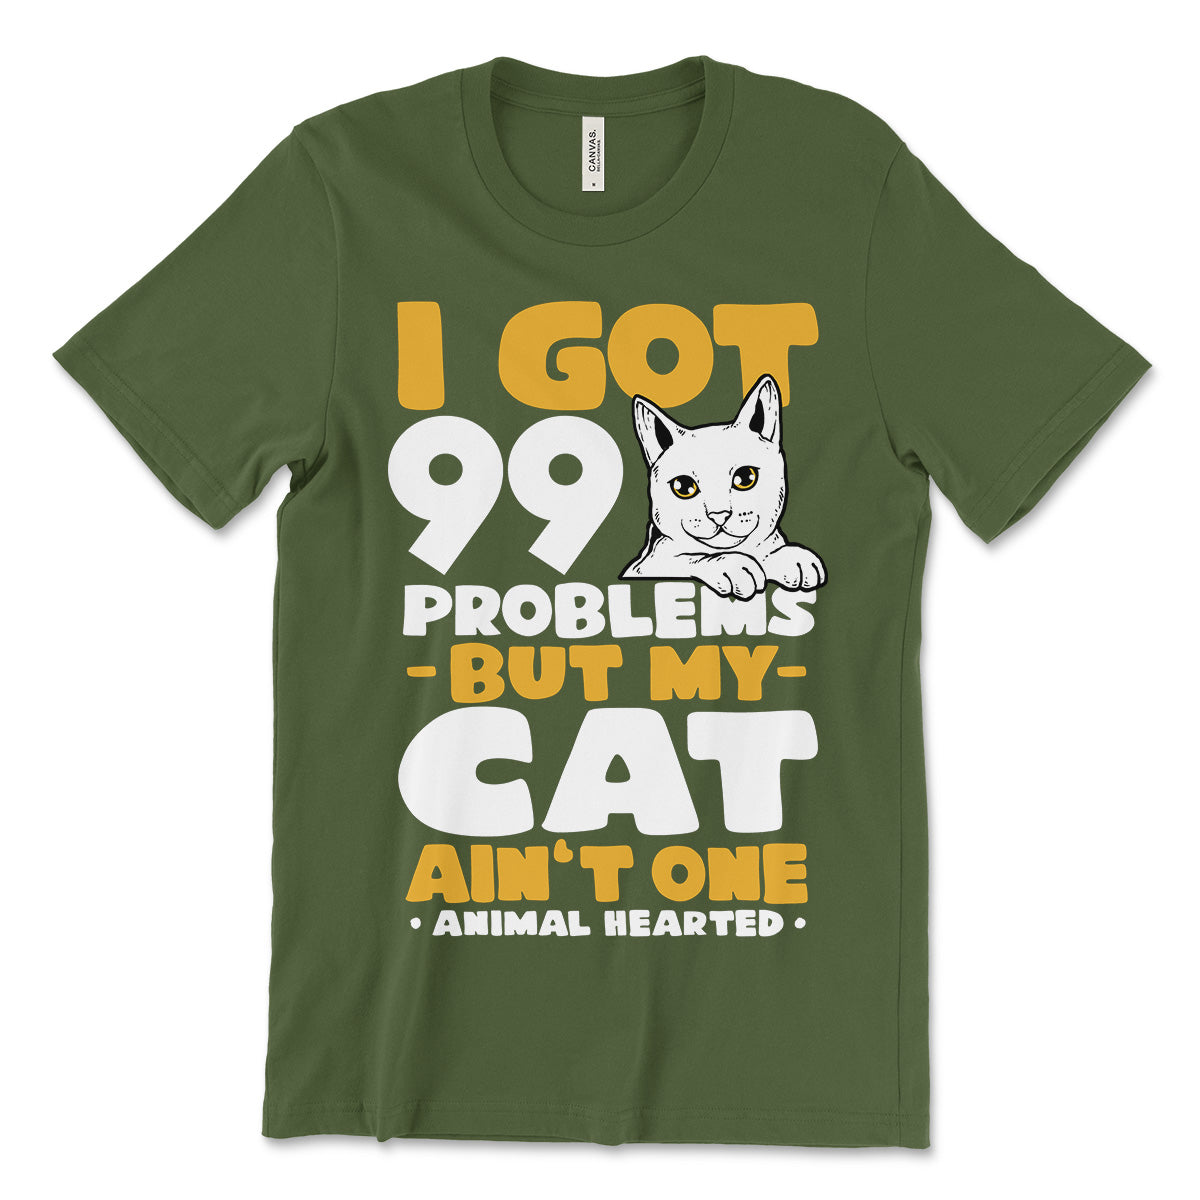 I Got 99 Problems But My Cat Ain t One T-Shirt